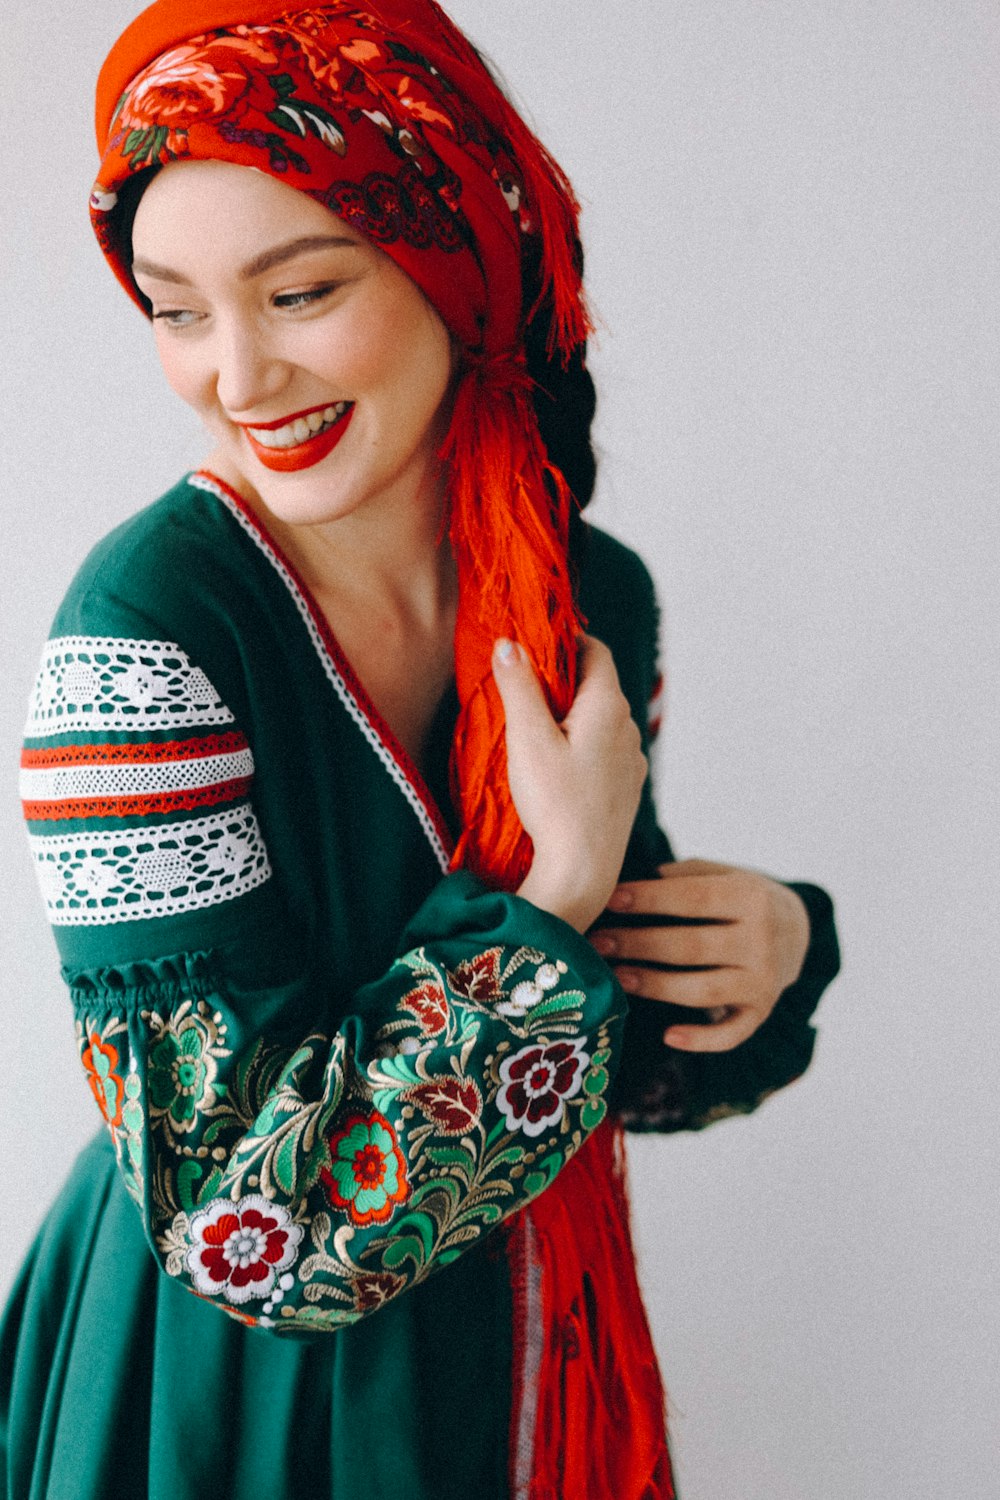 a woman with red hair wearing a green dress